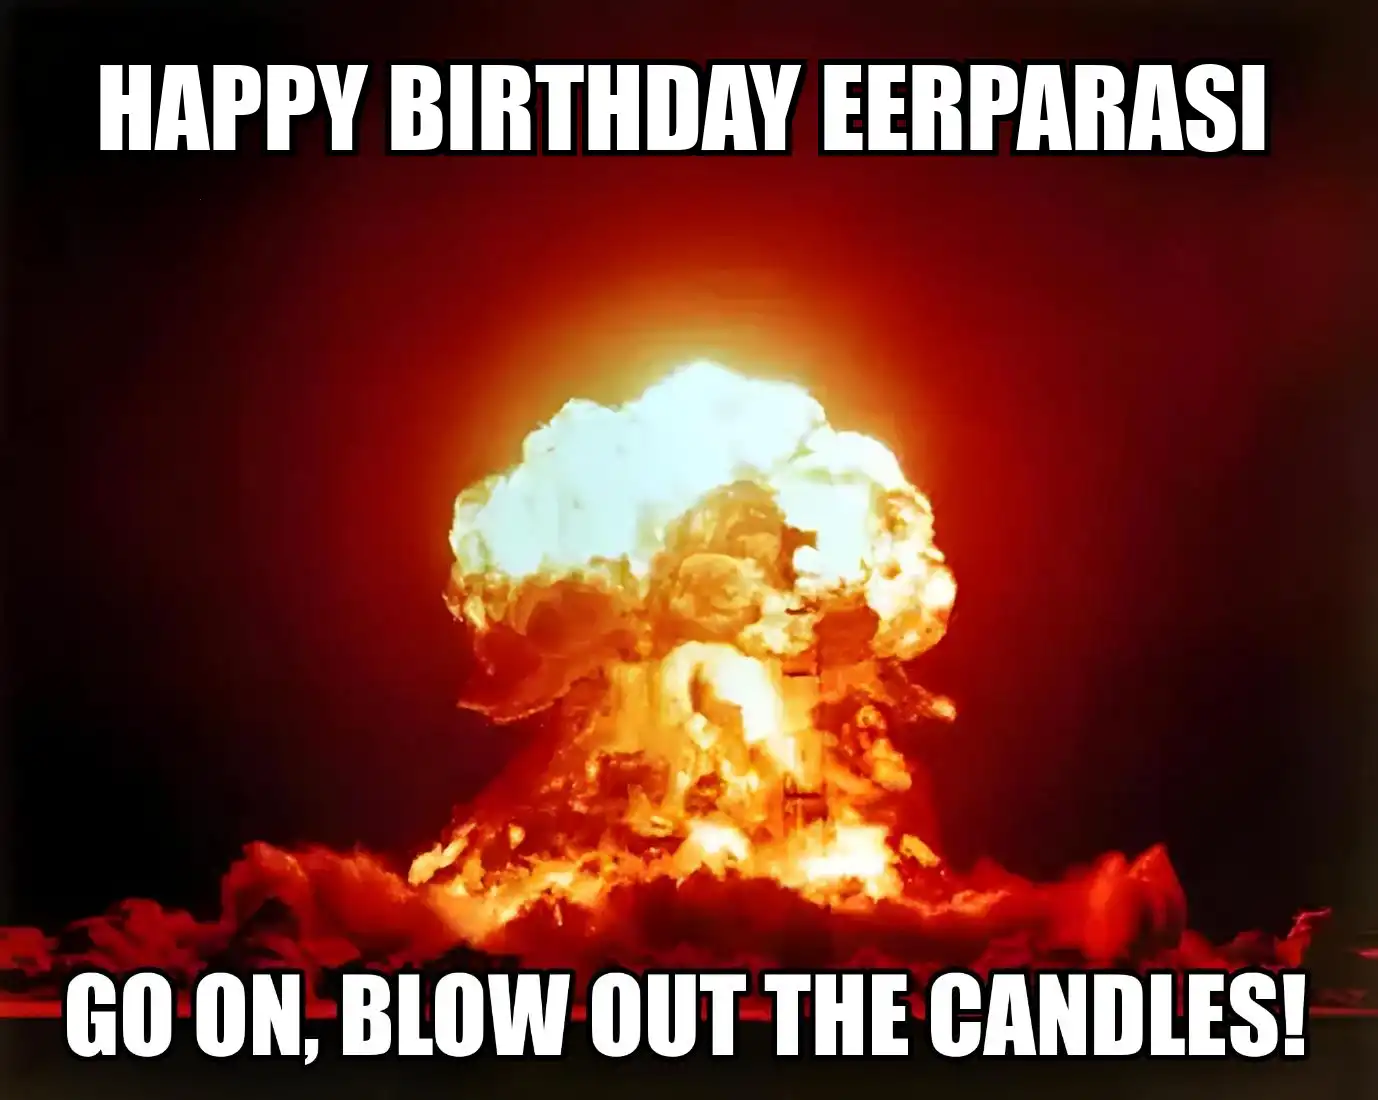 Happy Birthday Eerparasi Go On Blow Out The Candles Meme